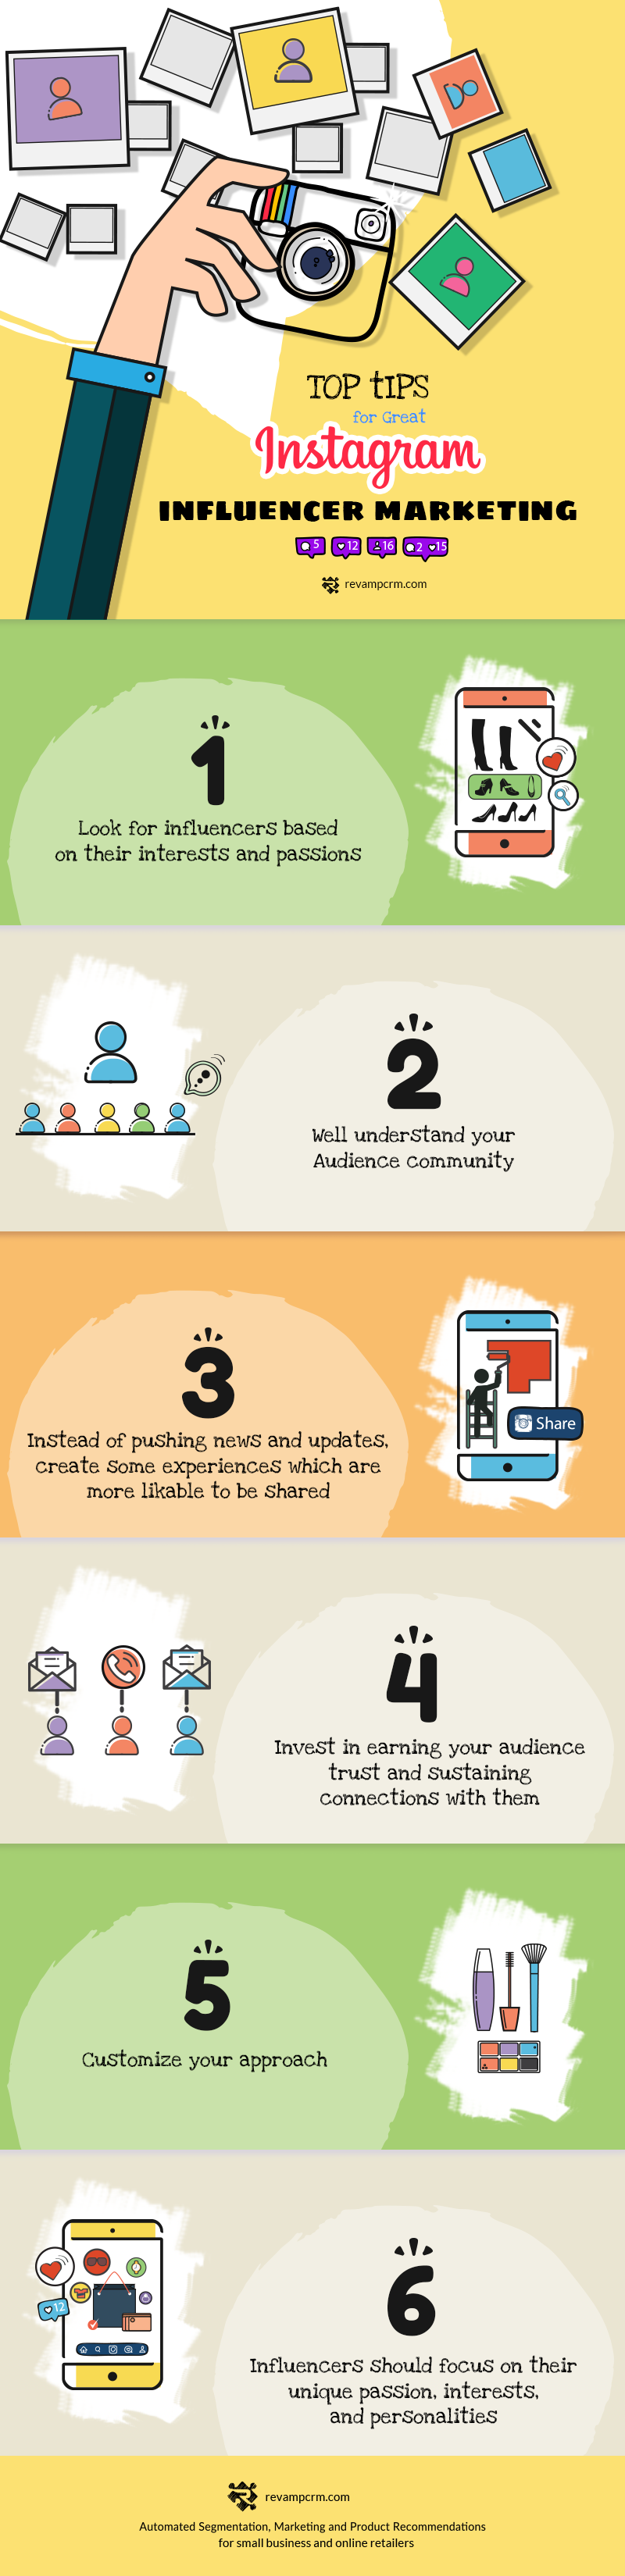 Top Tips for Instagram Influencer marketing - #infographic